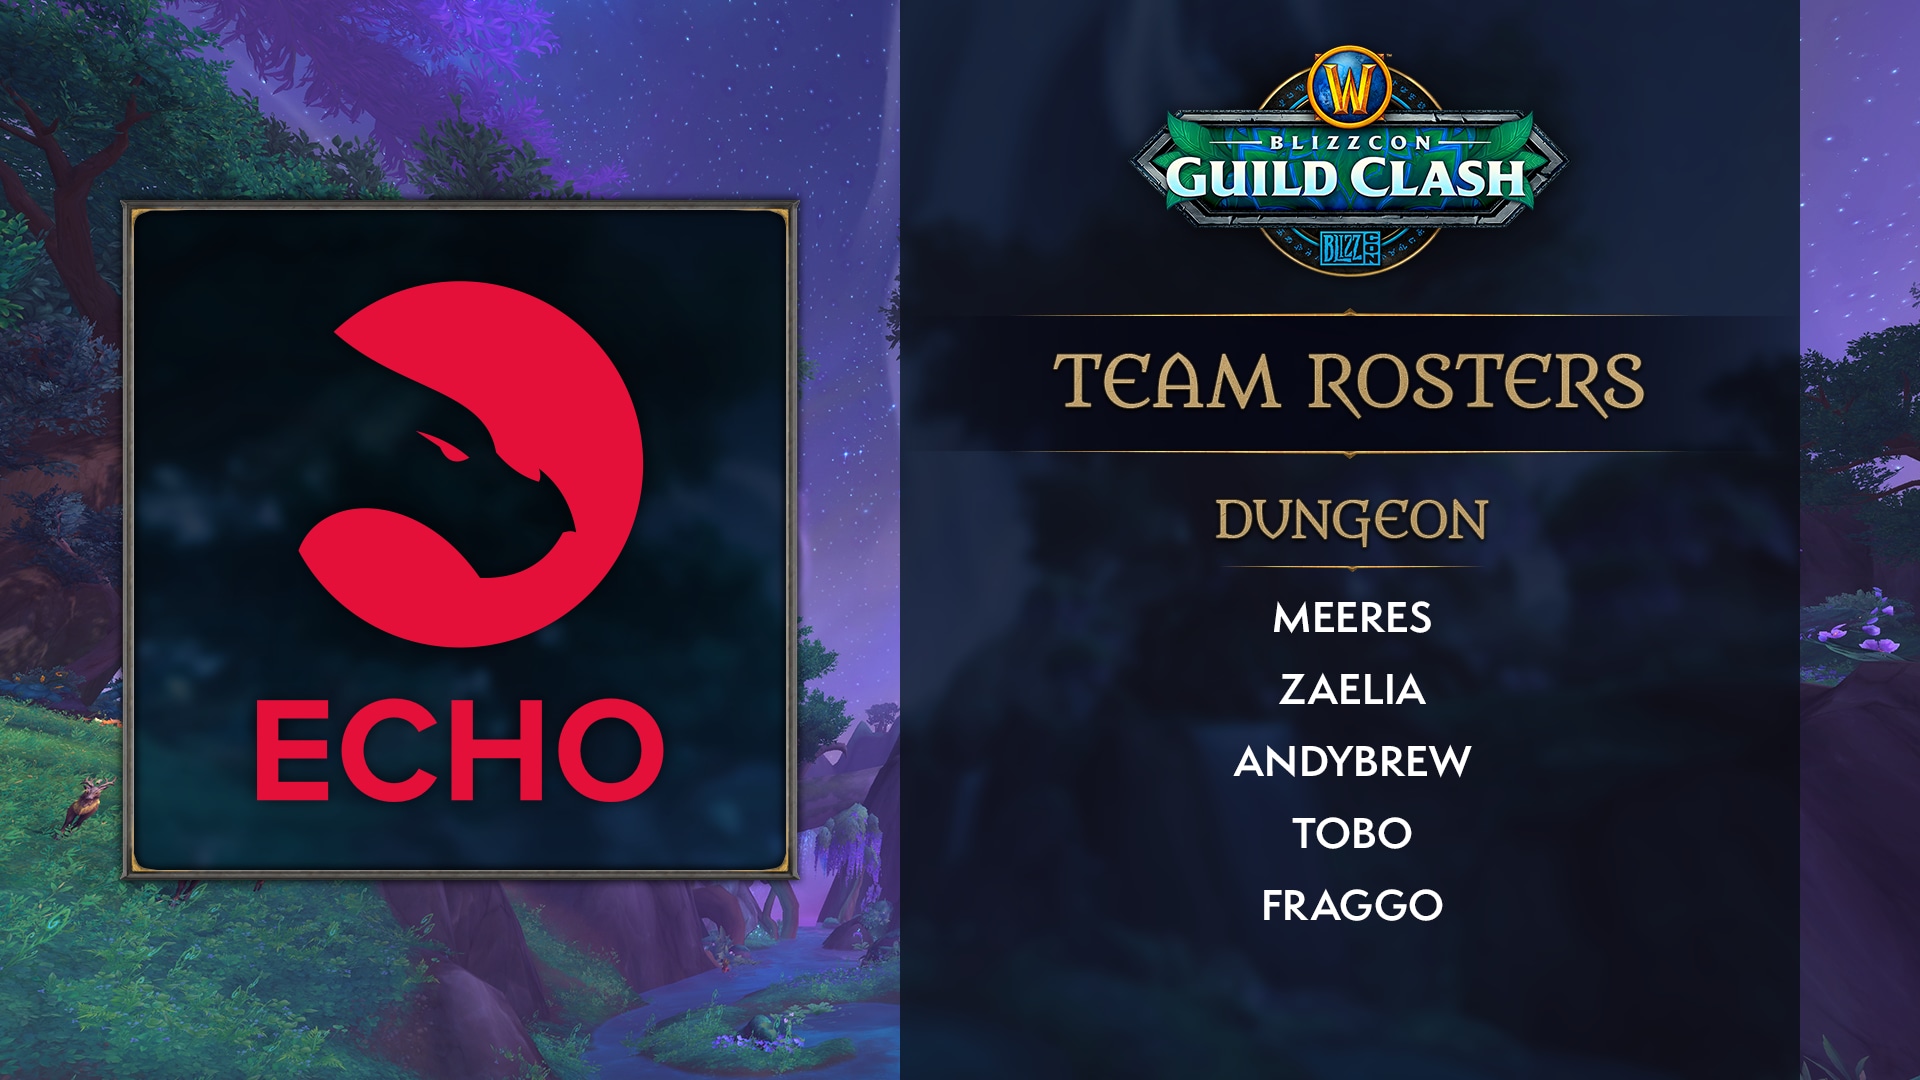 WoW_Esports_Blizzcon_GuildClash_TeamRoster_echo_dungeon.png